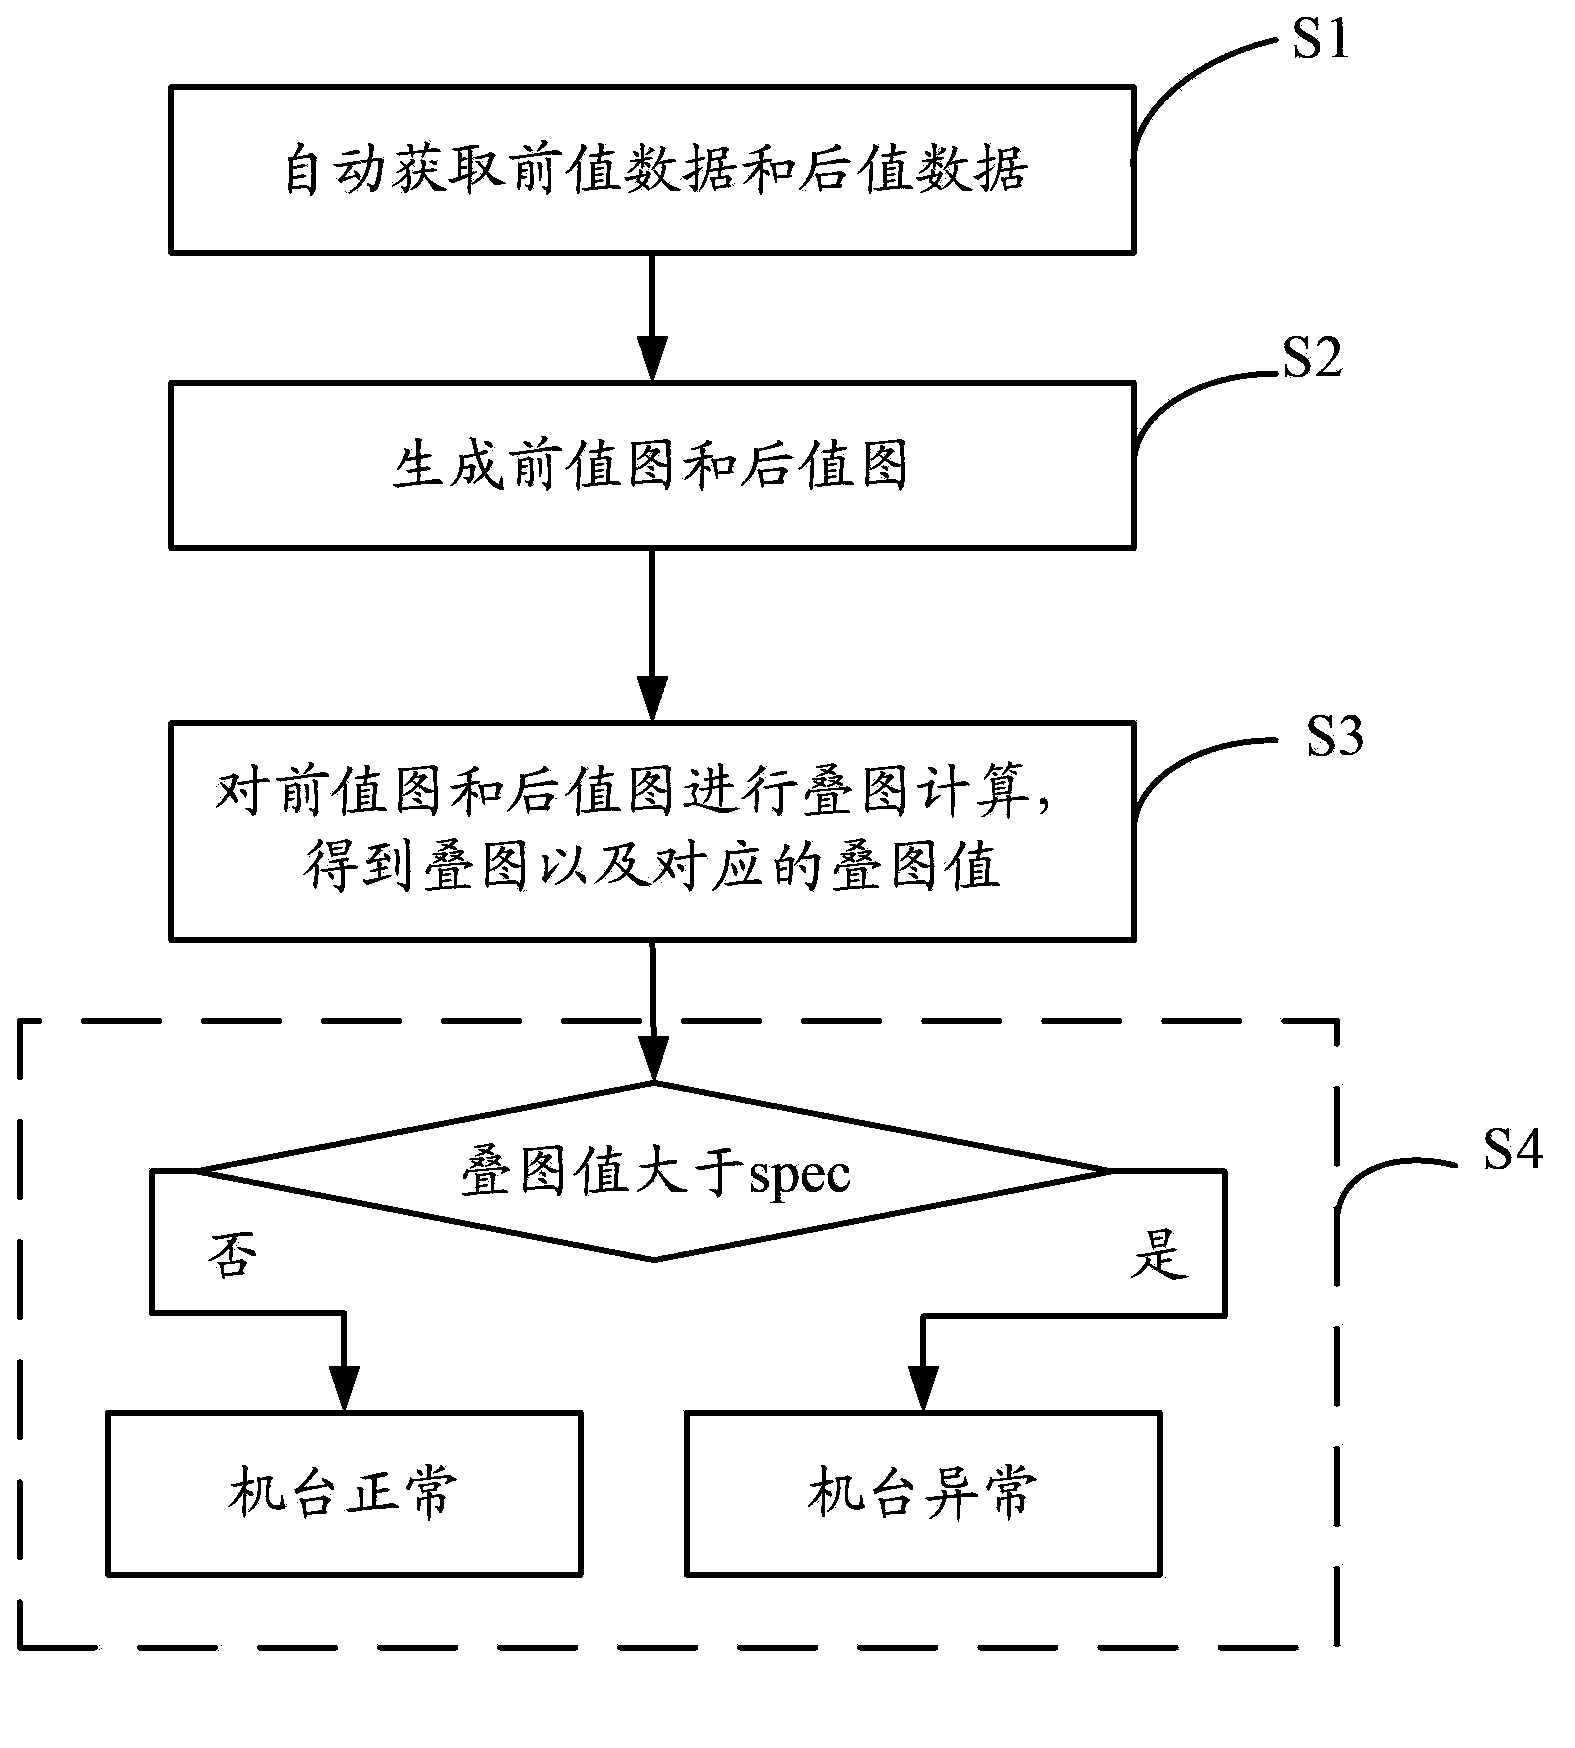 Semiconductor equipment machine quality monitoring method and system